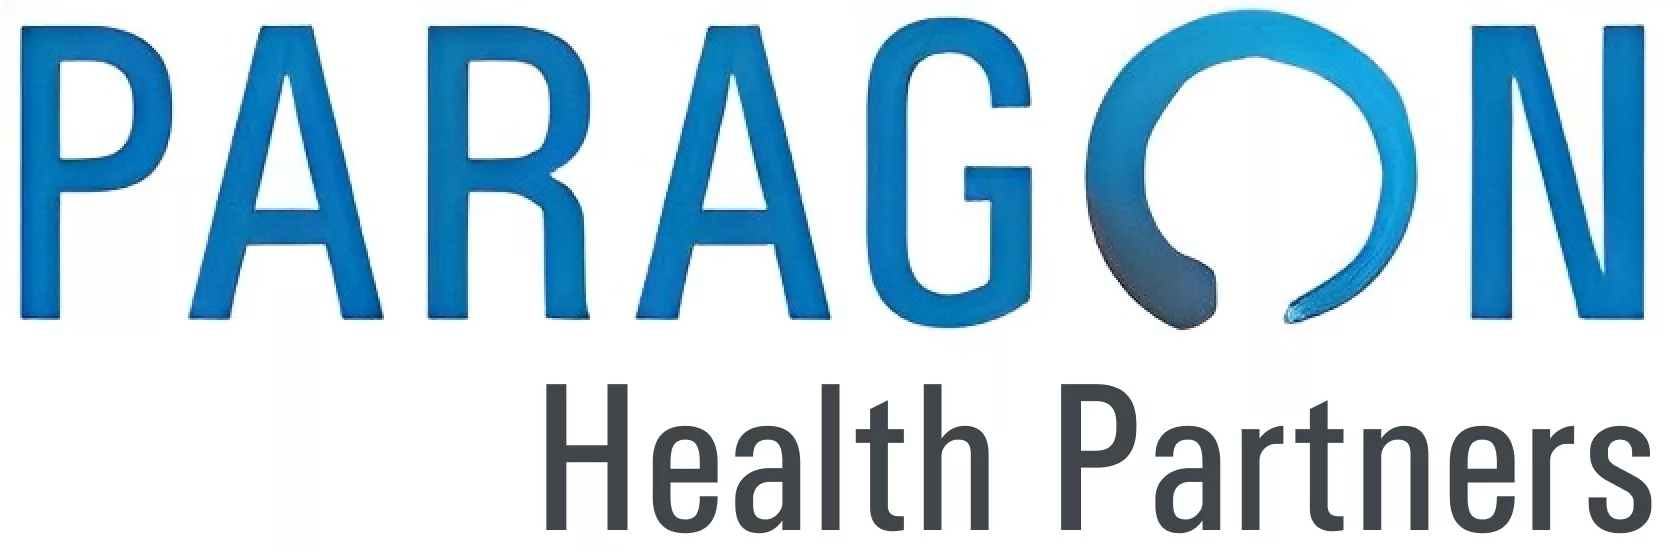 Paragon Health Partners - Weight Loss, Addiction & Pain Management